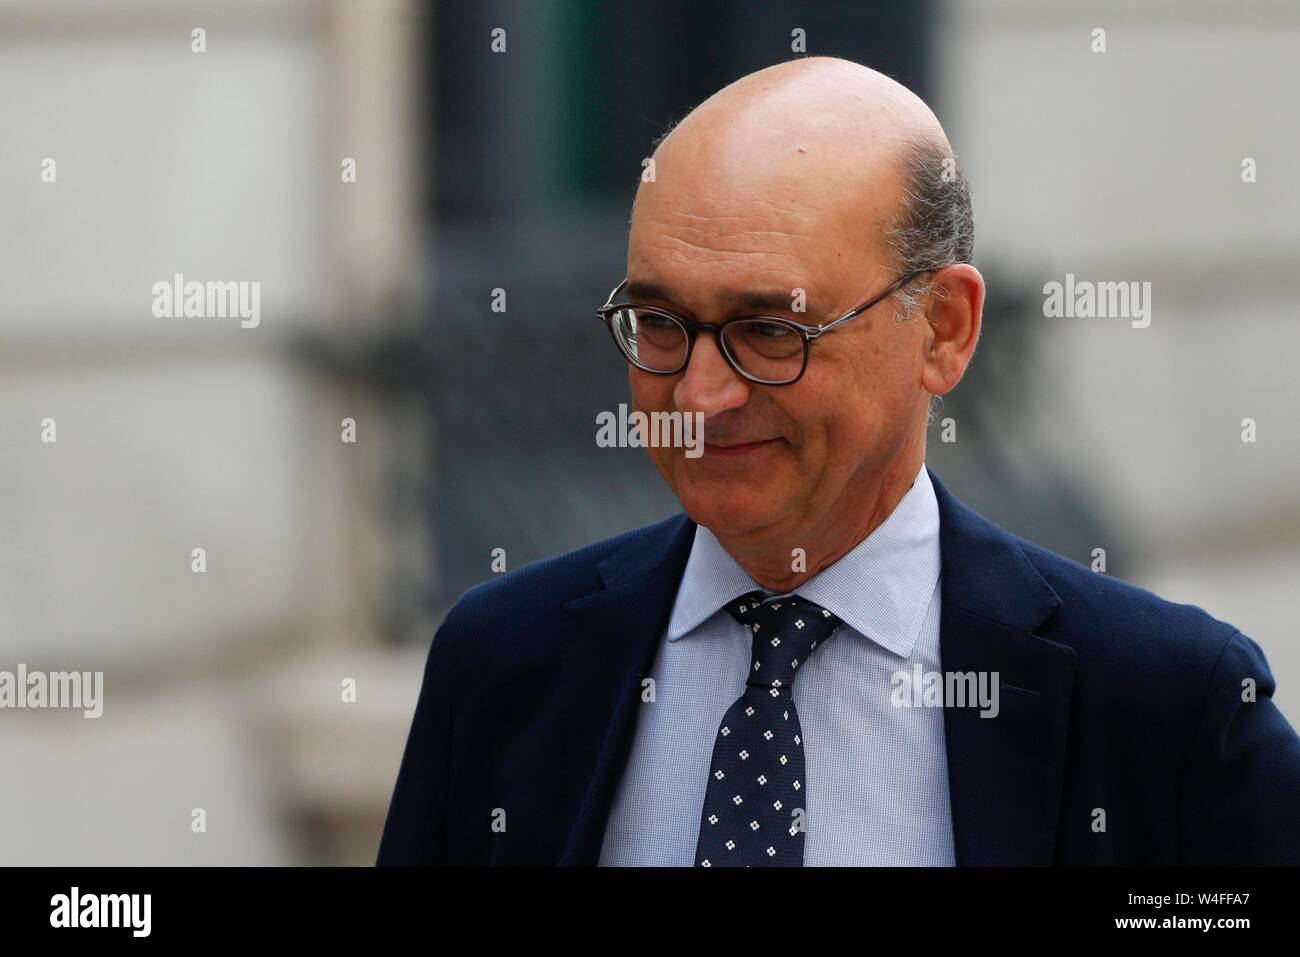 Madrid, Spain. 23rd July, 2019. DURING THE GOVERMENT TRAINING SESSION OF THE TWELFTH LEGISLATURE. TUESDAY, JULY 23, 2019 Credit: CORDON PRESS/Alamy Live News Stock Photo